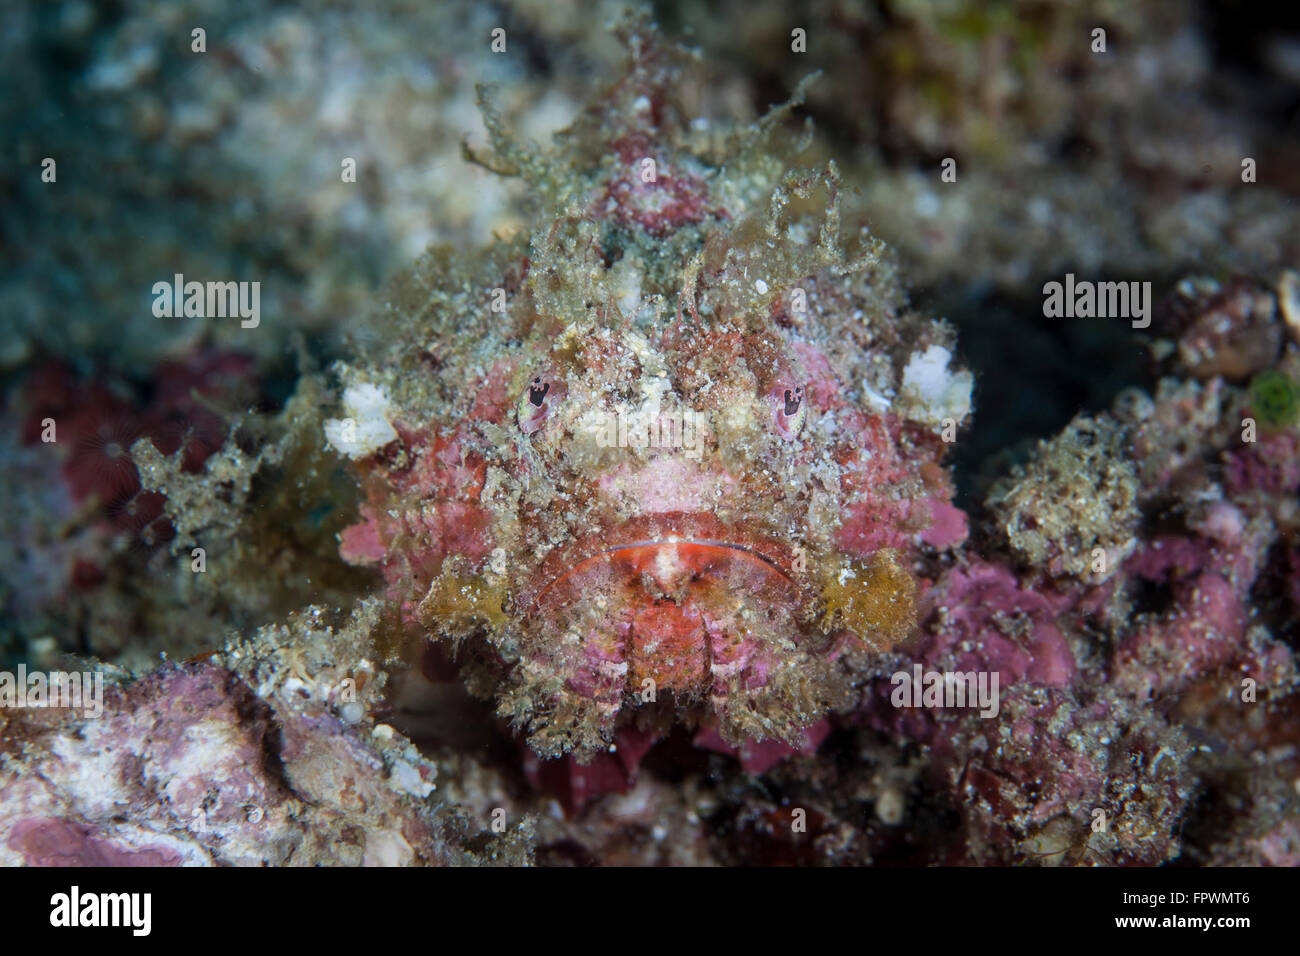 A well-camouflaged scorpionfish lays on a coral reef near the island of Sulawesi, Indonesia. This tropical region, within the Co Stock Photo